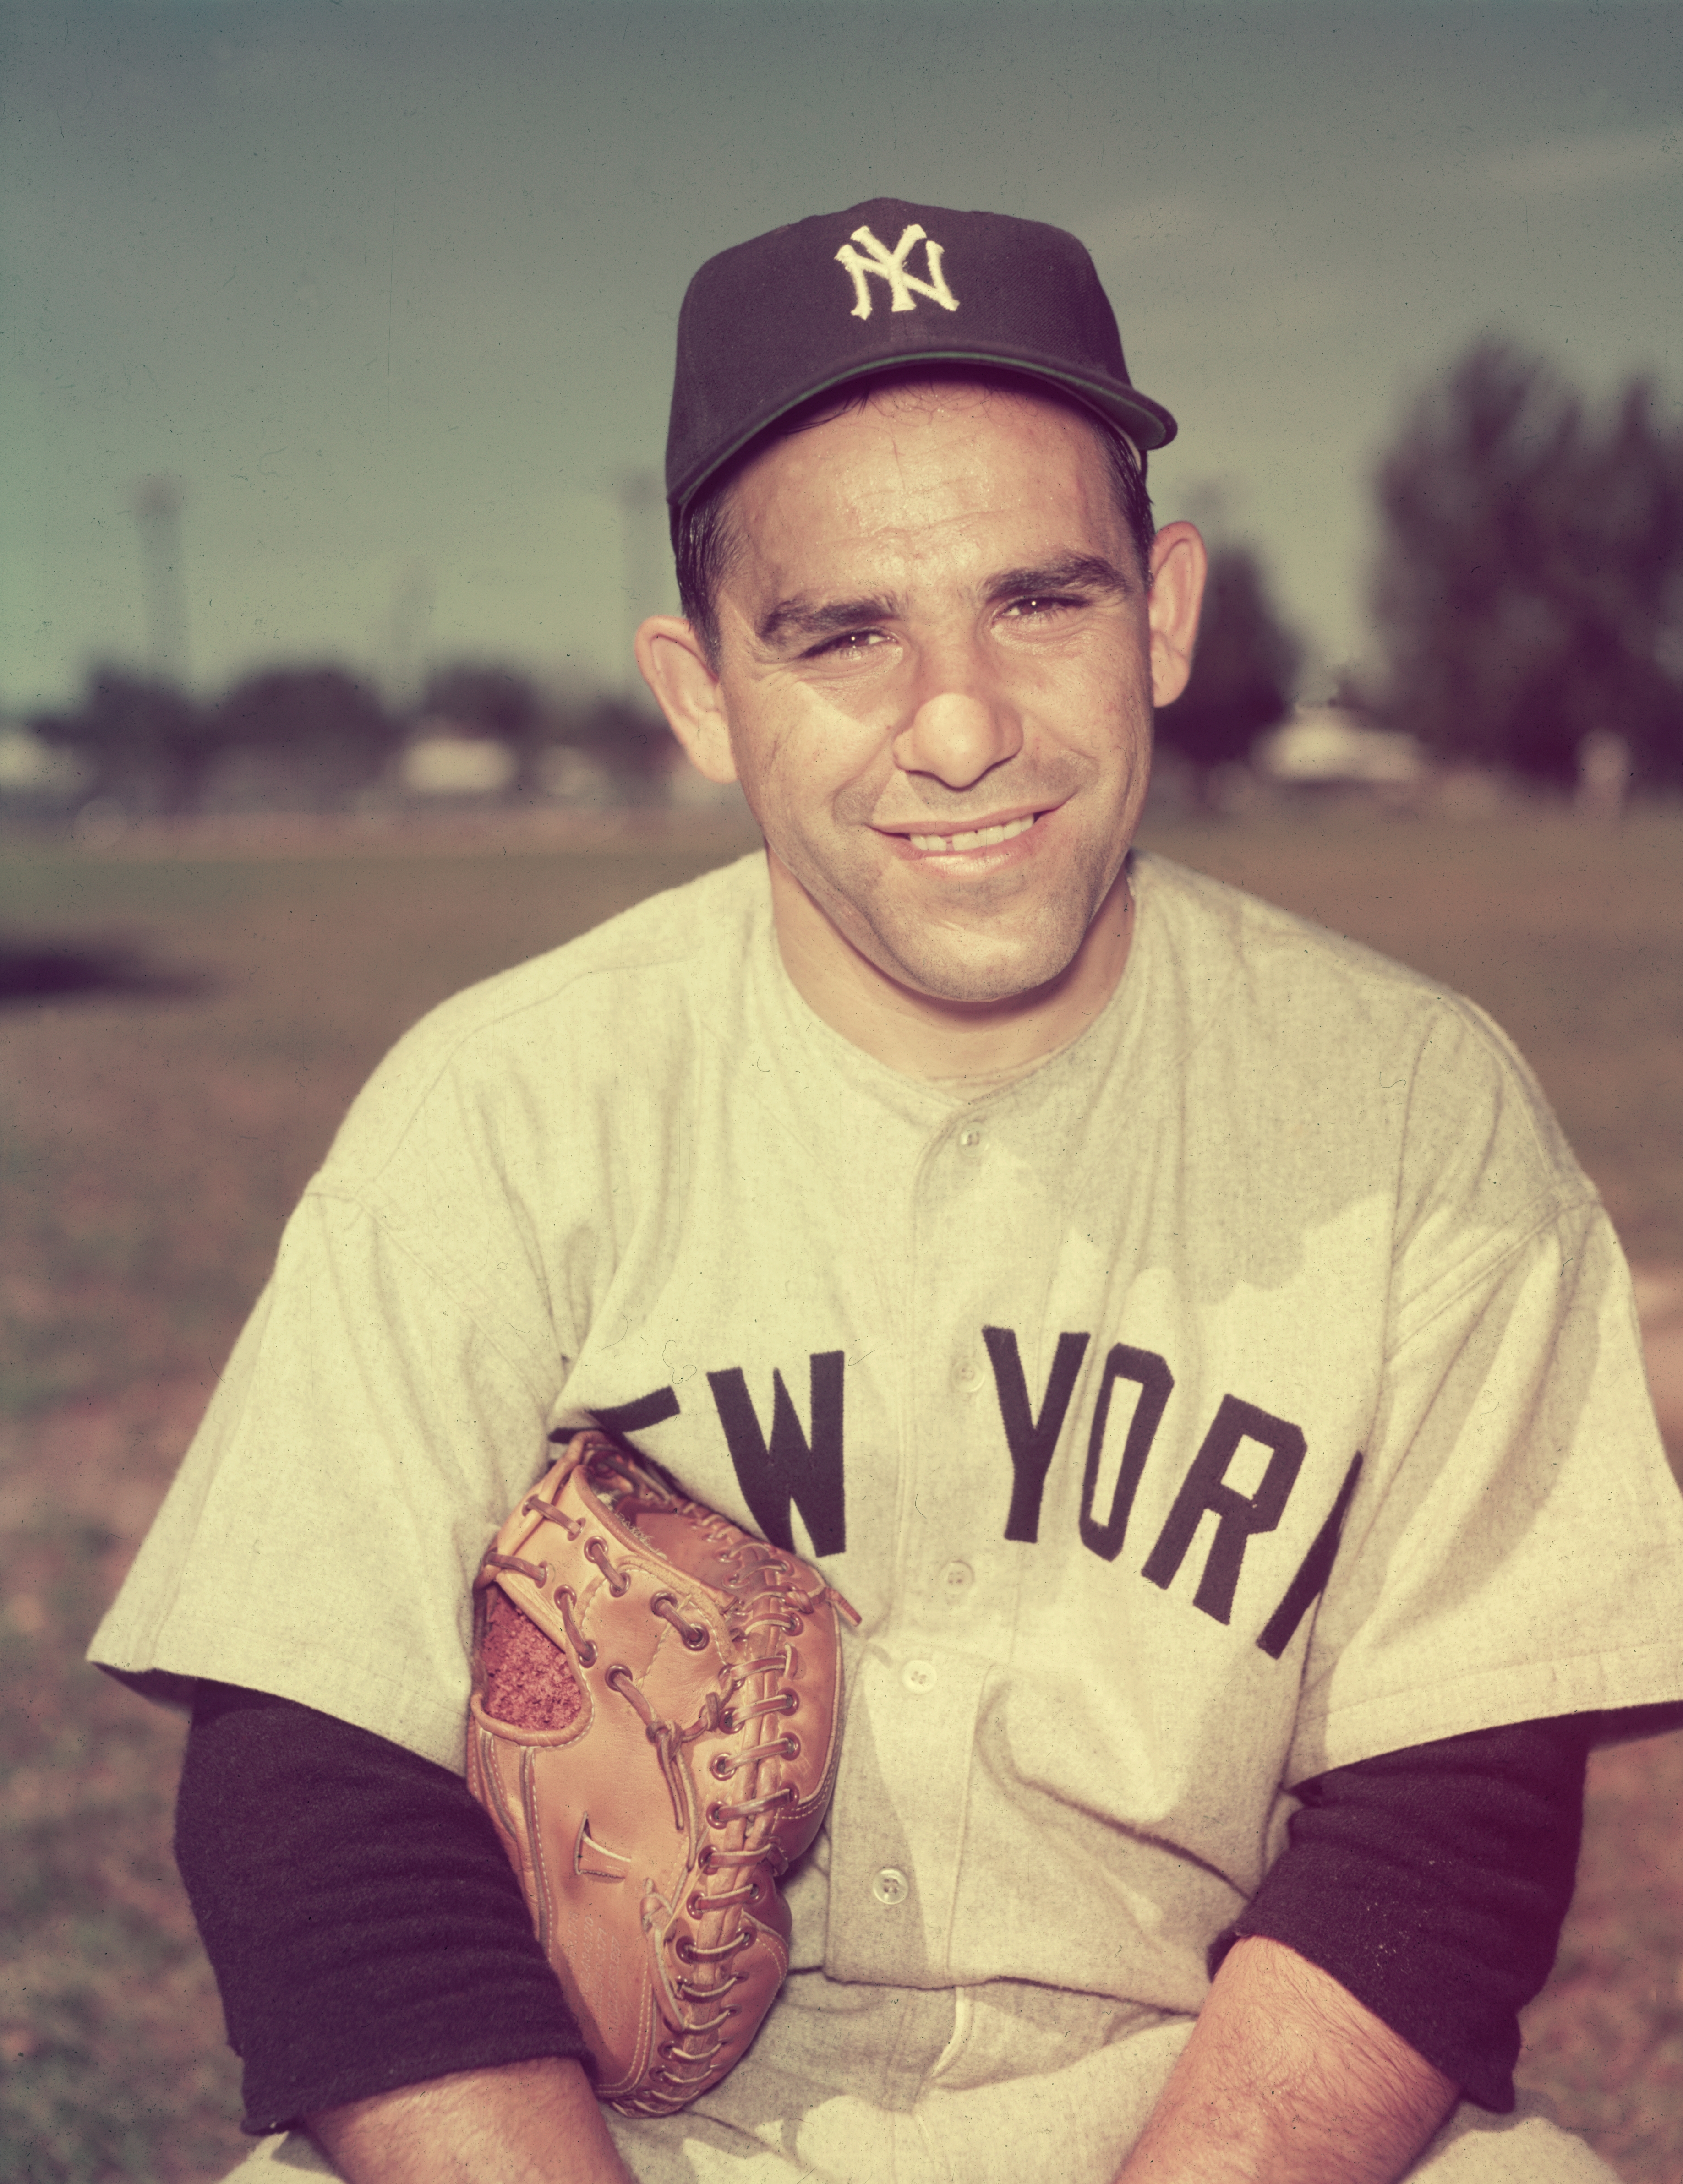 circa 1955: Portrait of Yogi Berra in his New York Yankees uniform with a baseball glove under his arm, New York City. (Photo by Hulton Archive/Getty Images)